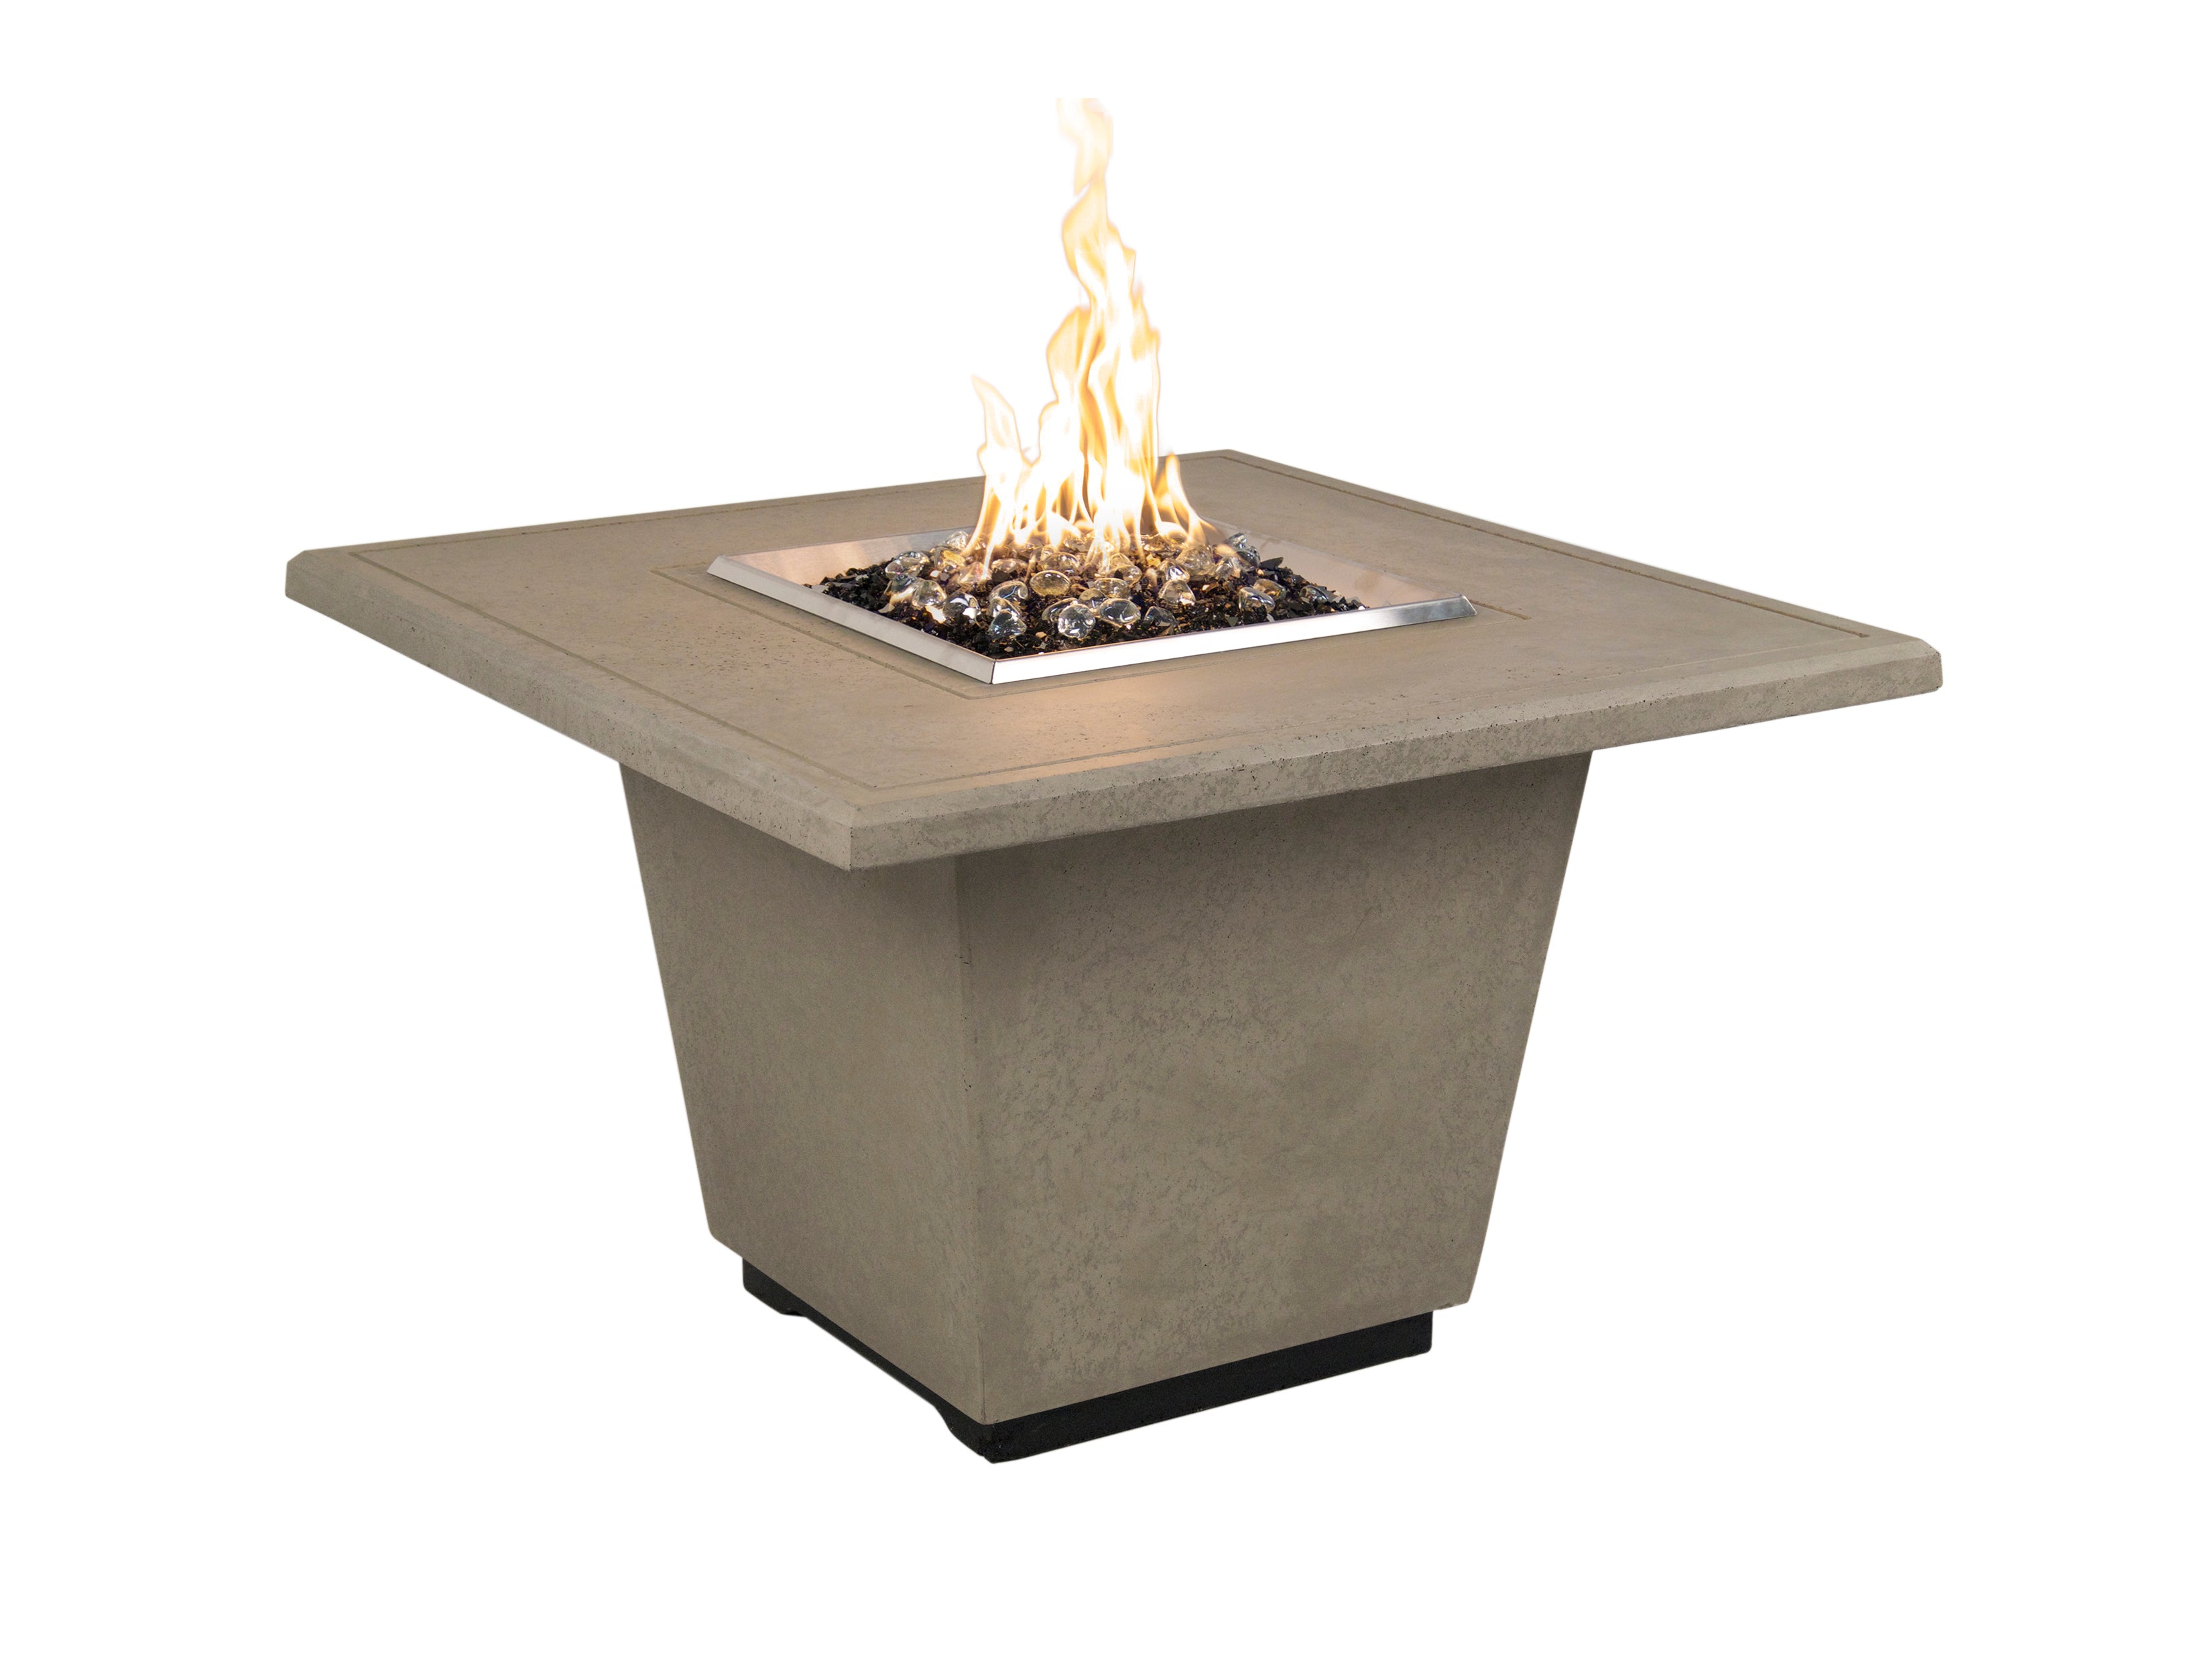 36" Cosmopolitan Square Fire Table  by American Fyre Design